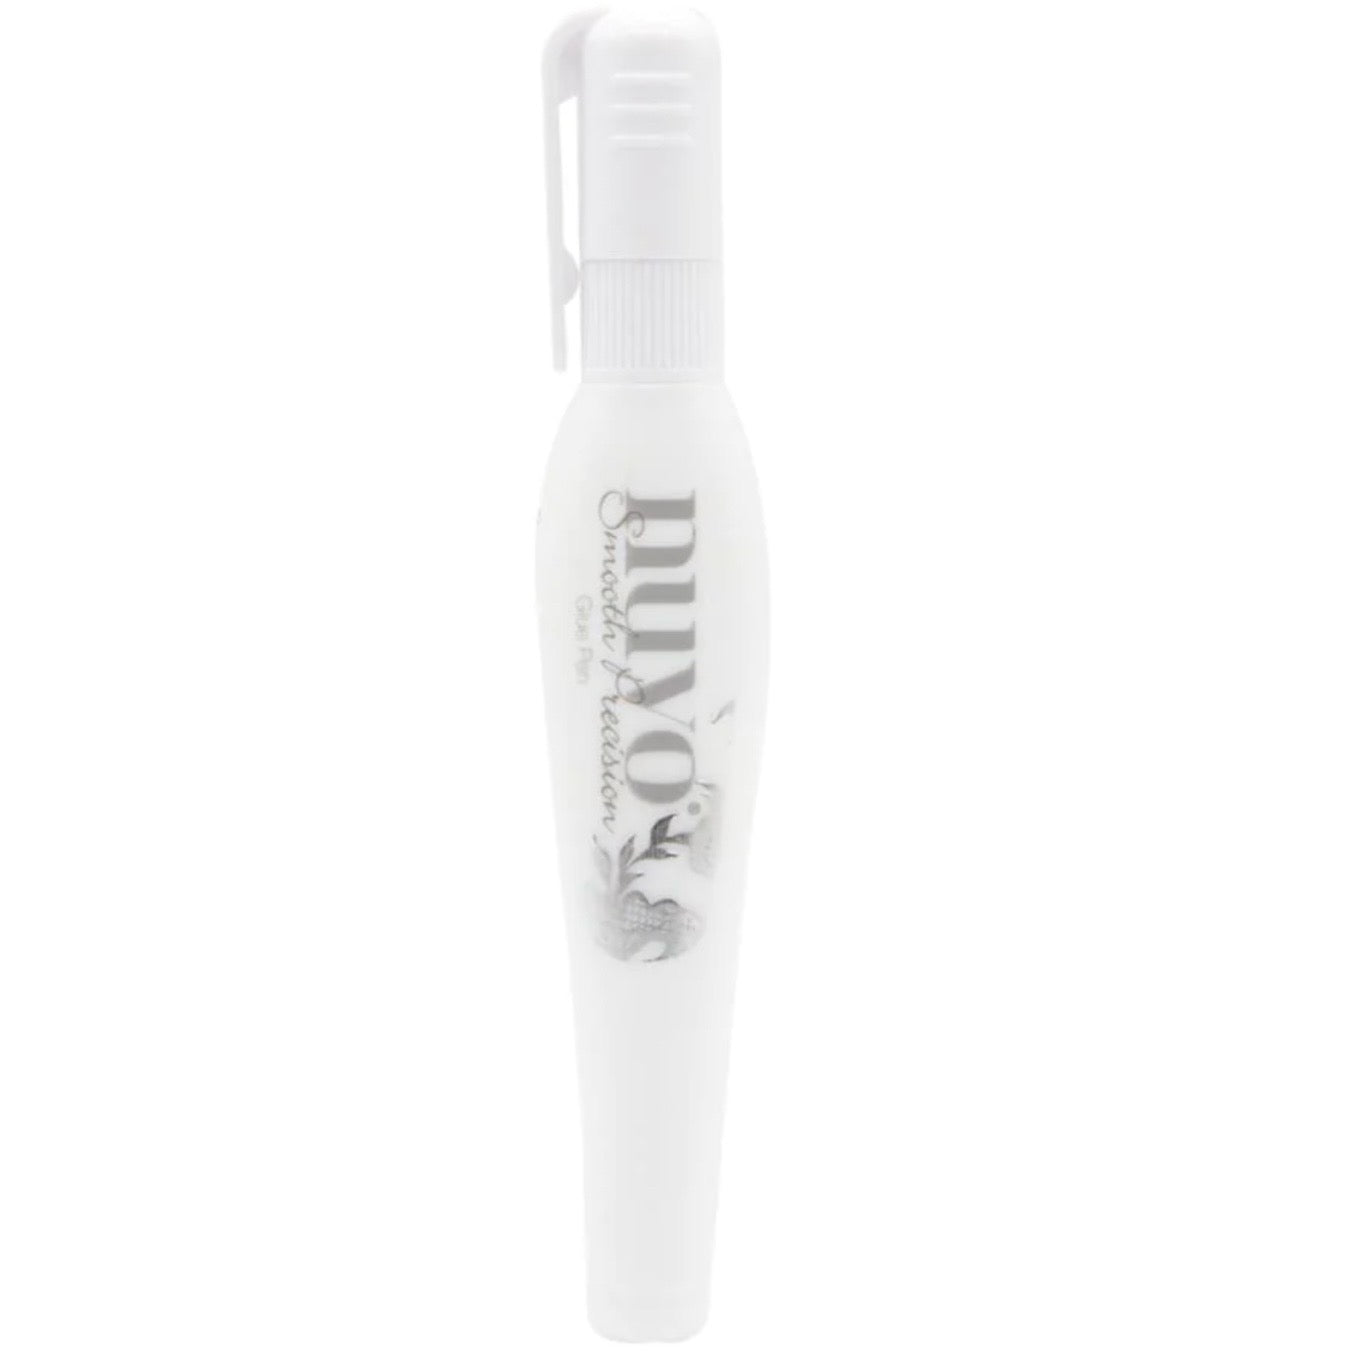 Nuvo Glue Pen Smooth Precision – Kreative Kreations